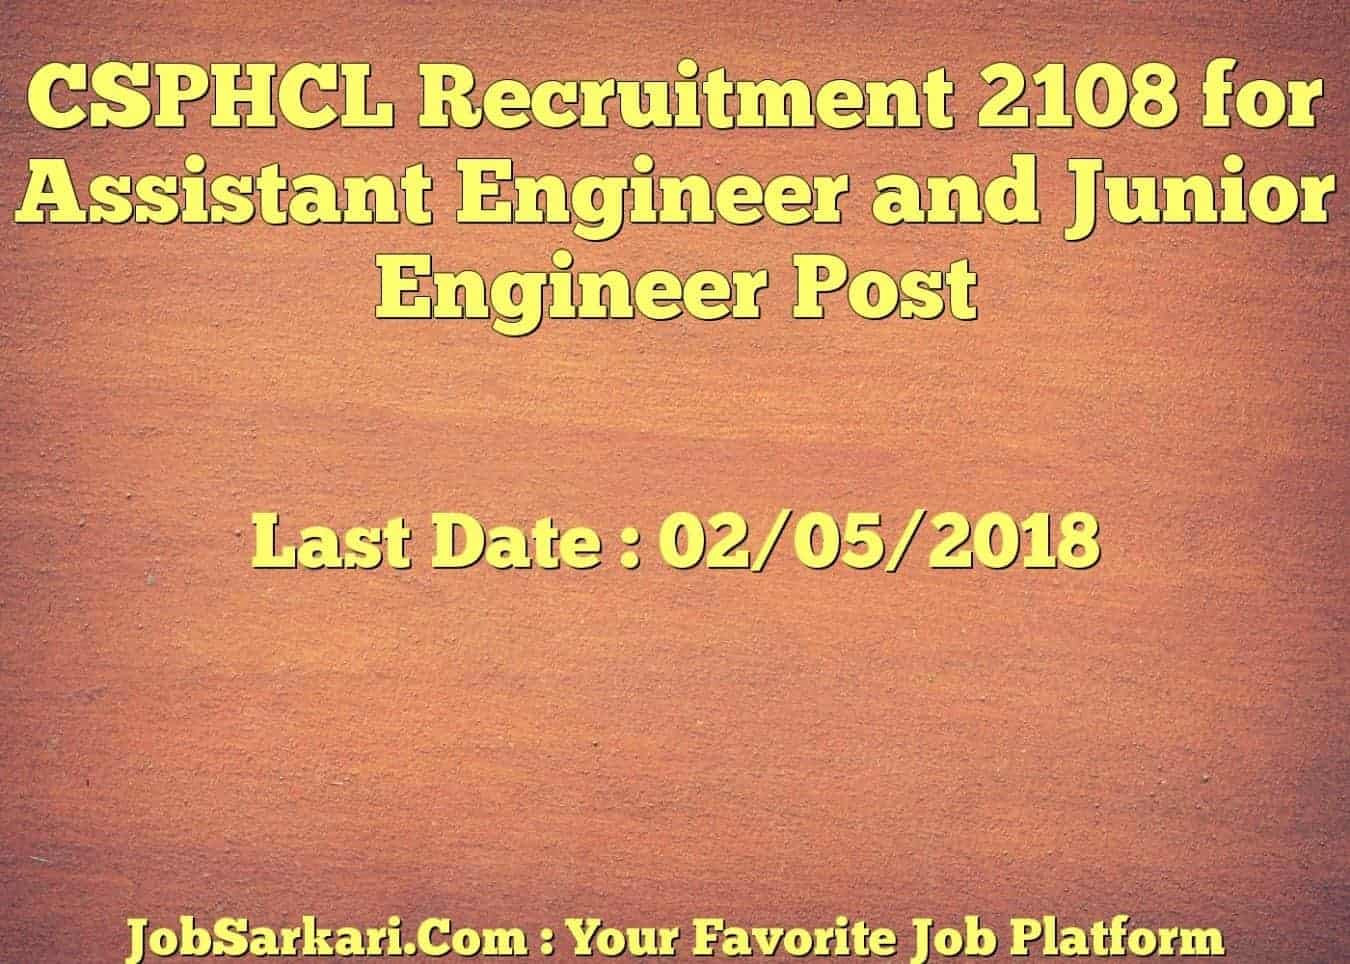 CSPHCL Recruitment 2108 for Assistant Engineer and Junior Engineer Post